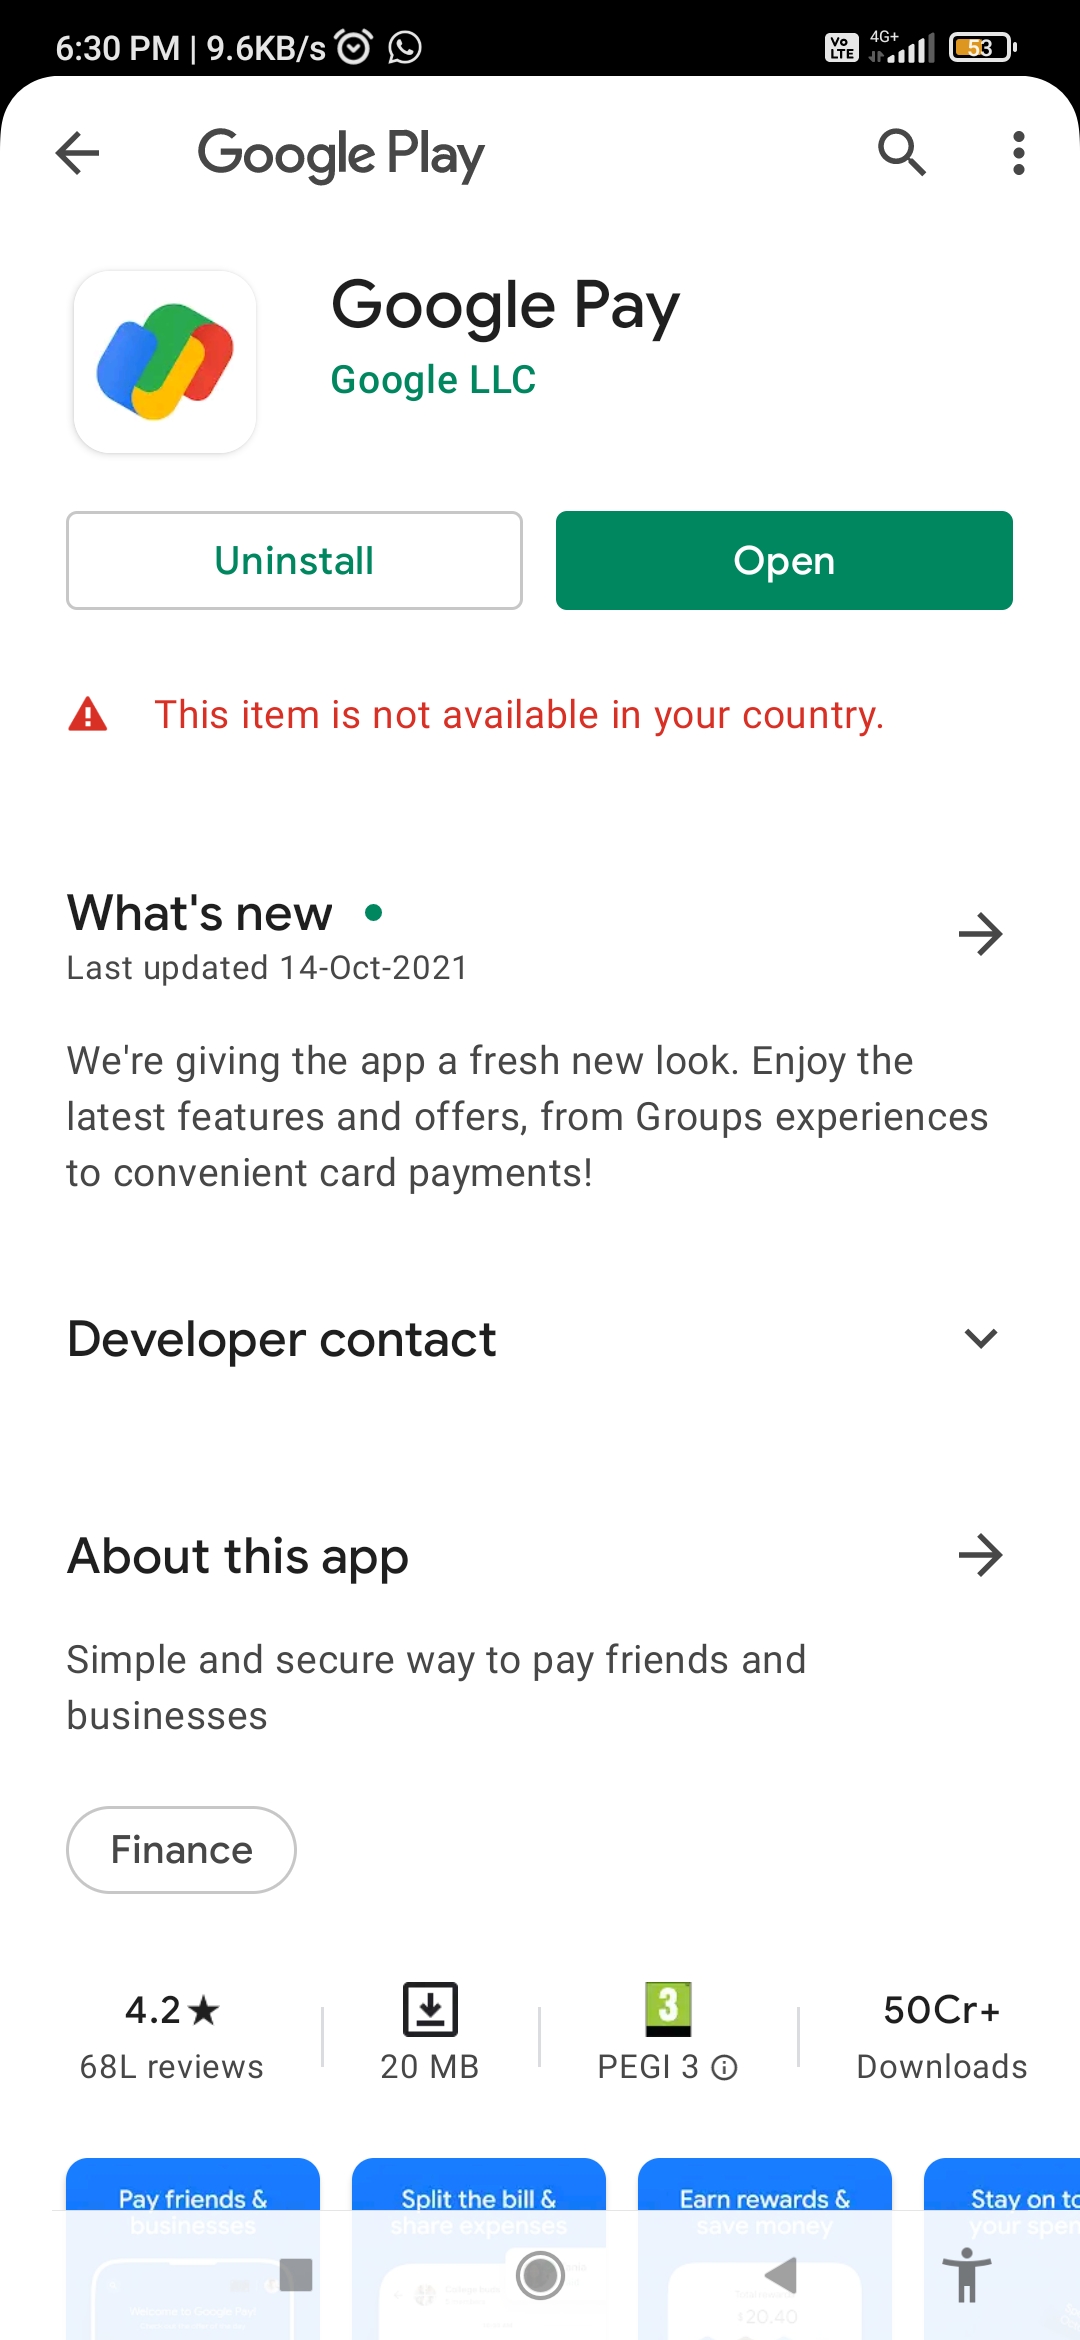 how to get an app that is not available in your country